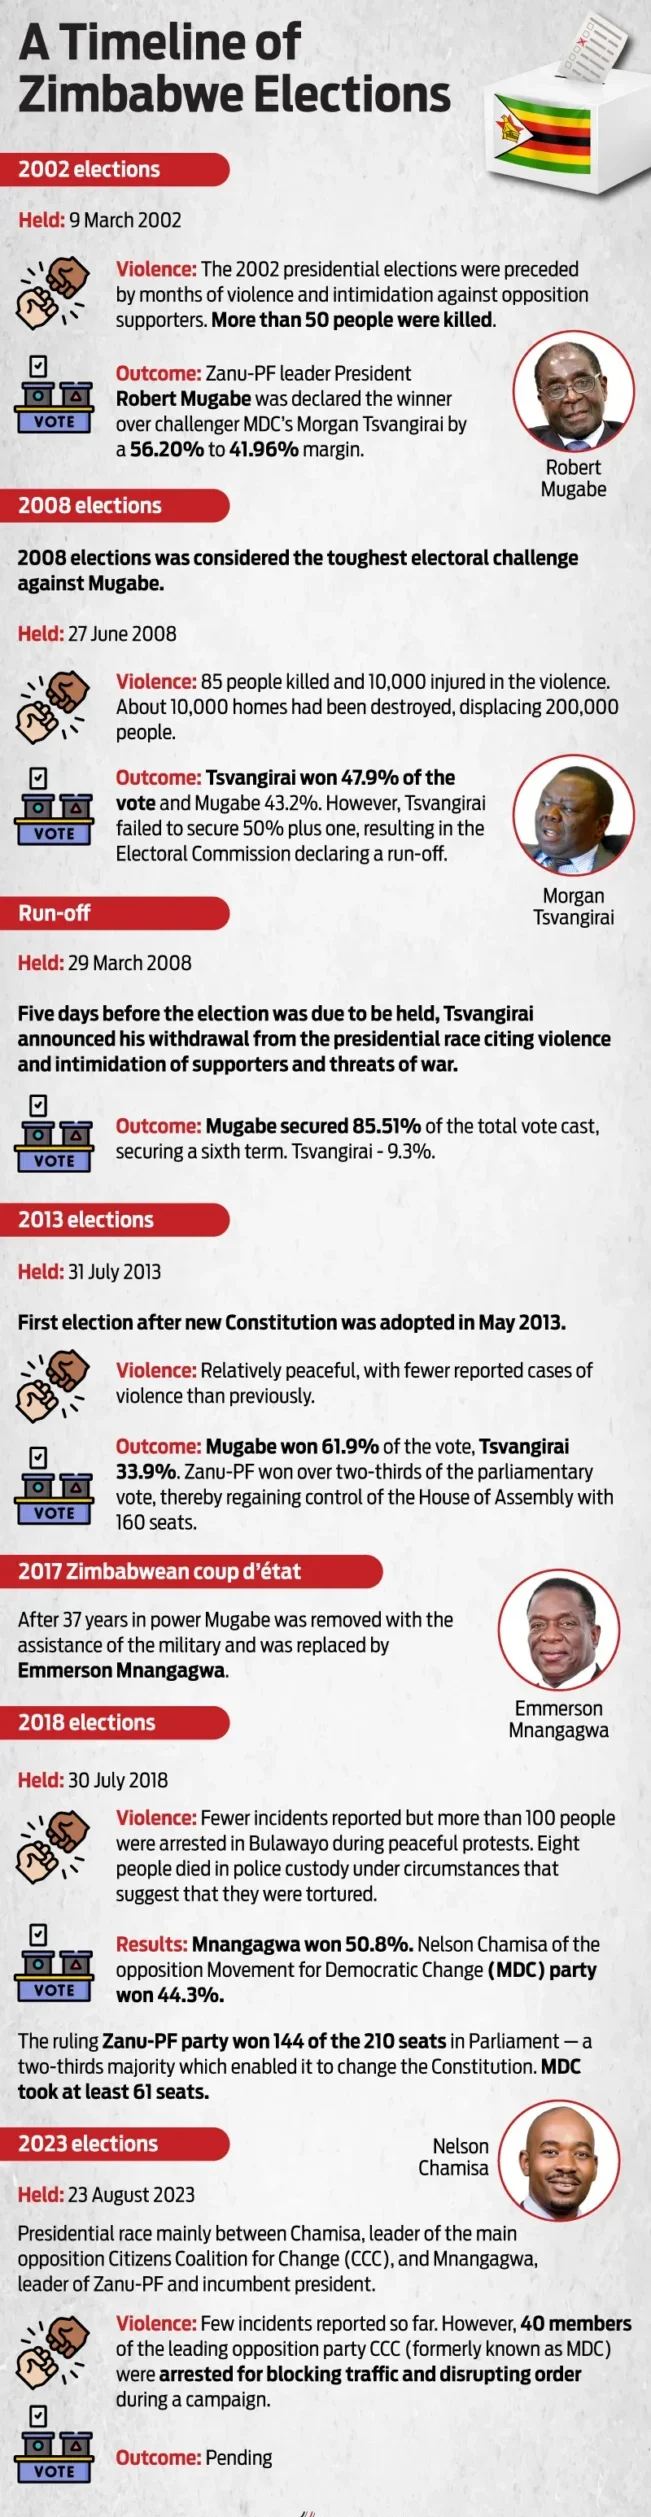 It’s déjà vu! A graphic timeline of Zimbabwean elections over the years